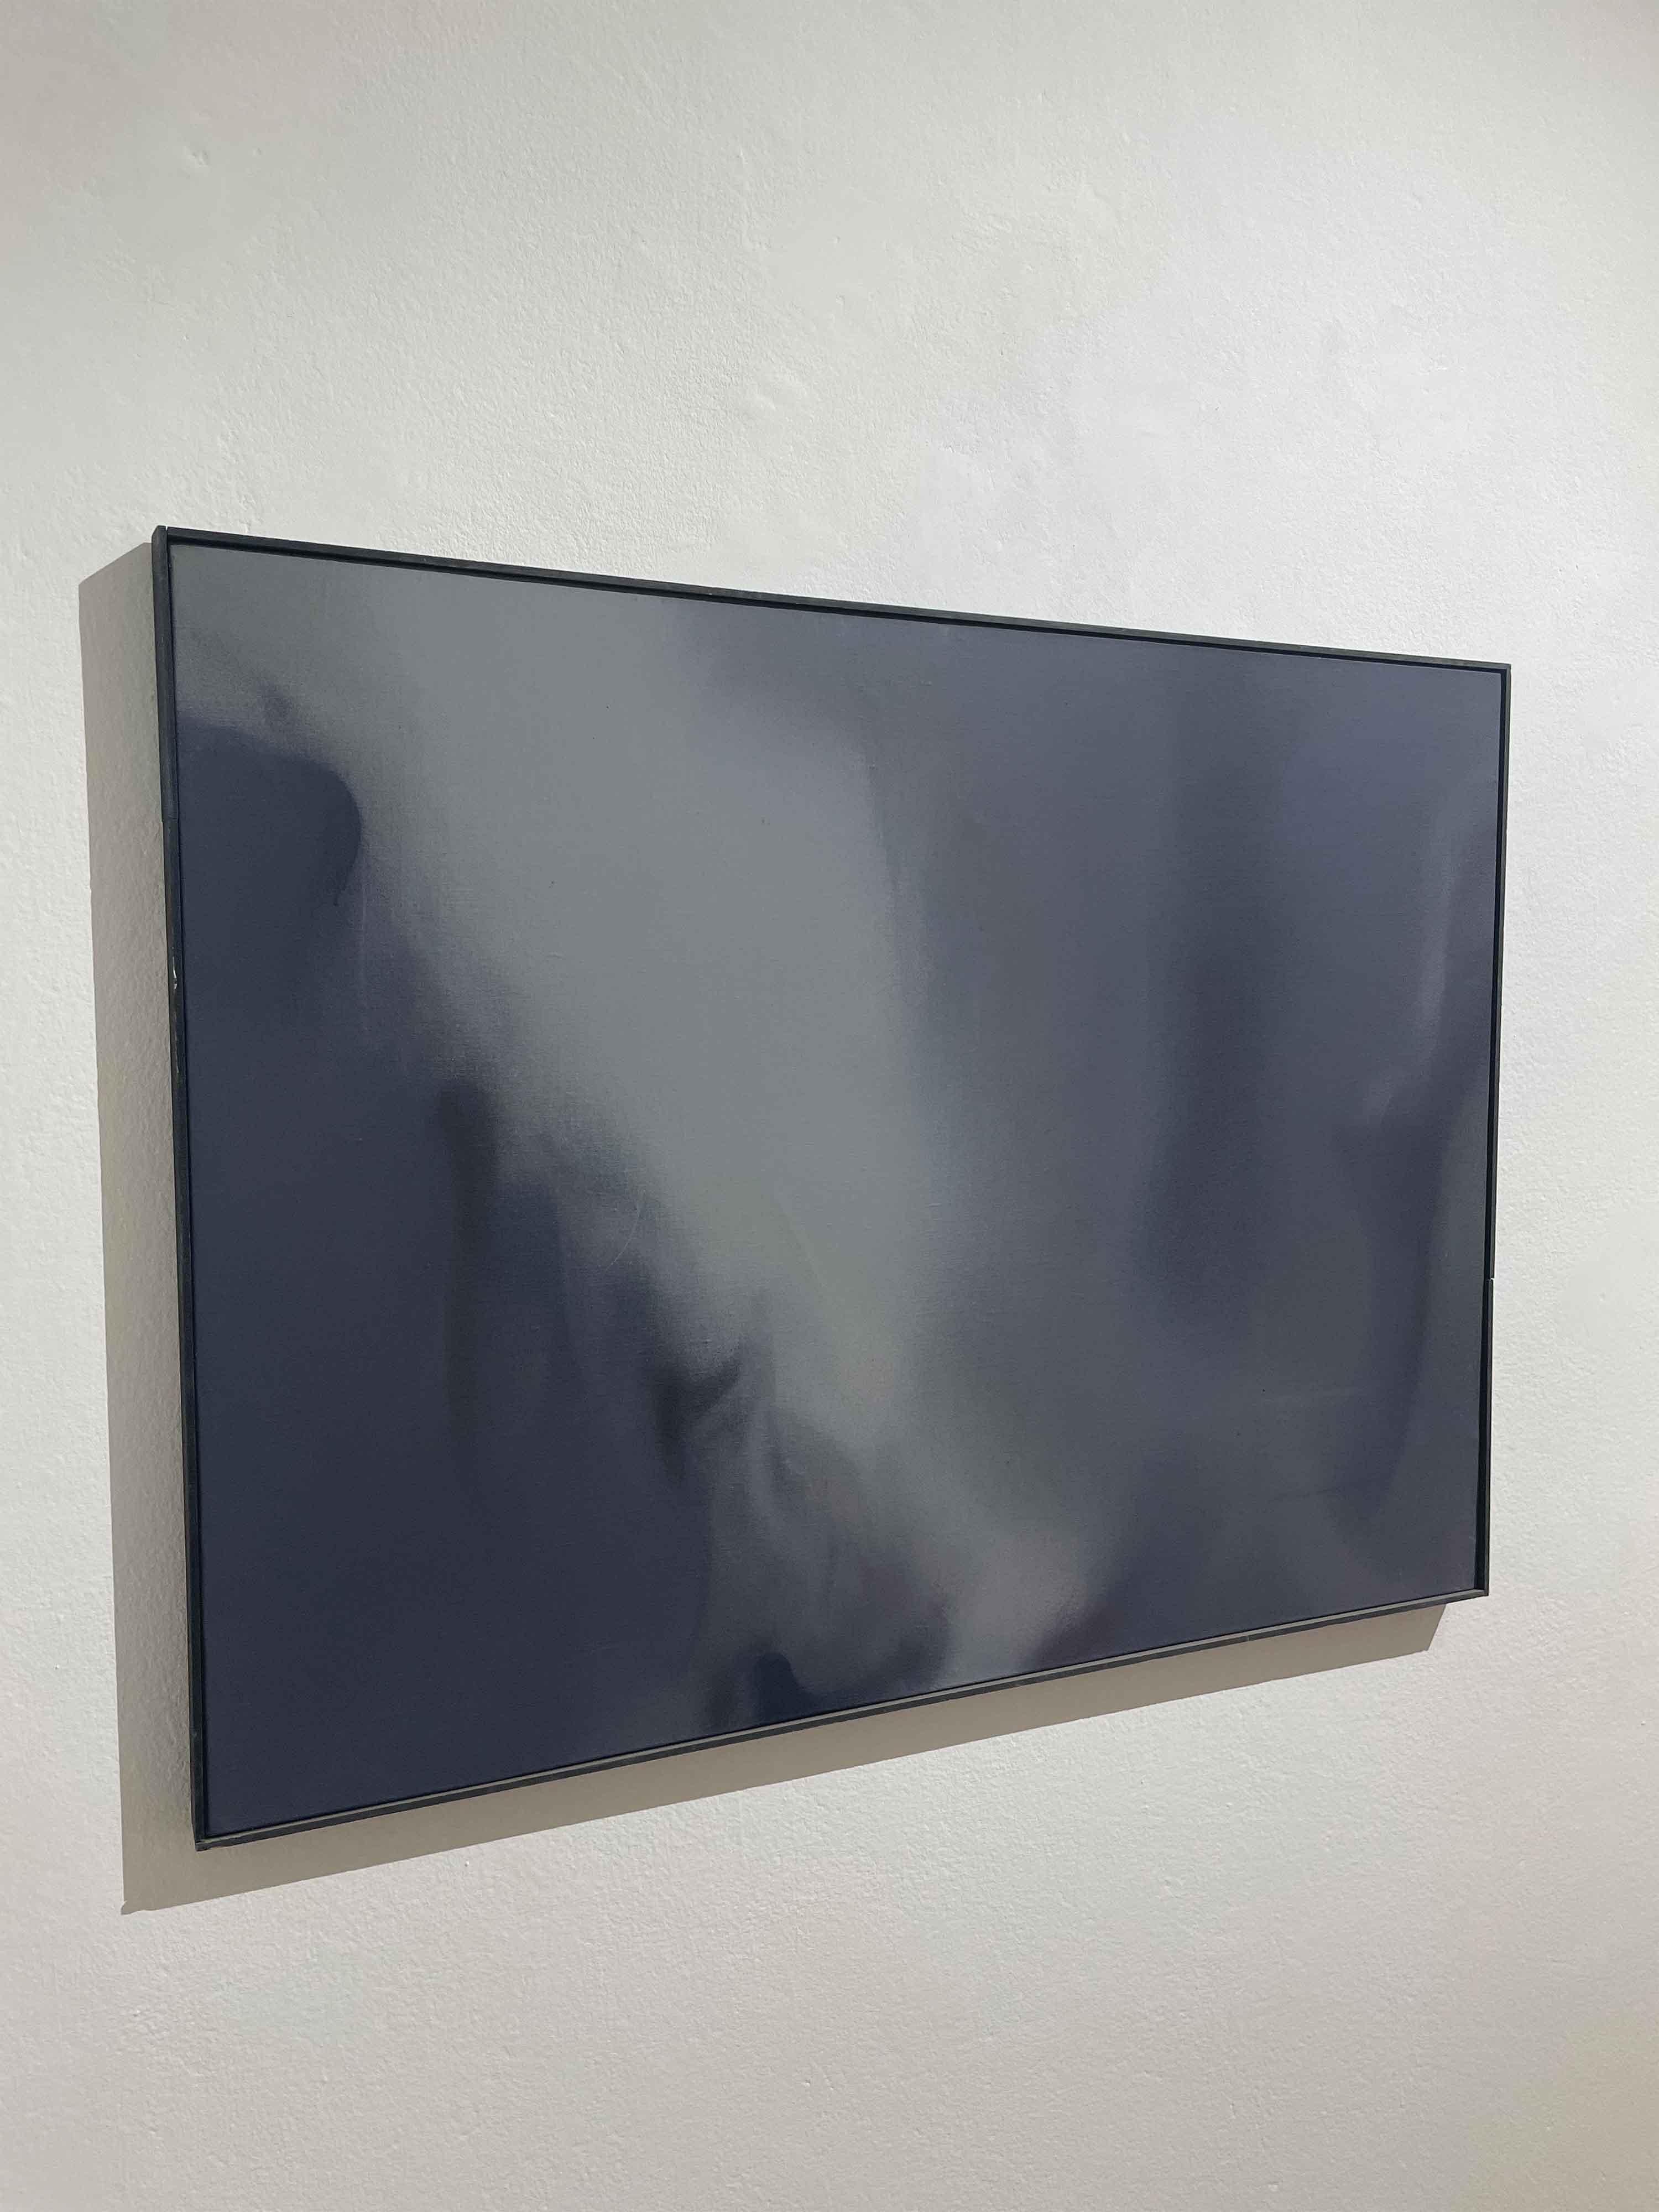 In this masterpiece Claudio Olivieri experimented with palette darkening, using a spray gun to distribute the oil and achieve an unprecedented result. In addition, this painting gives a feeling of mystical grandeur. Looking at this painting gives